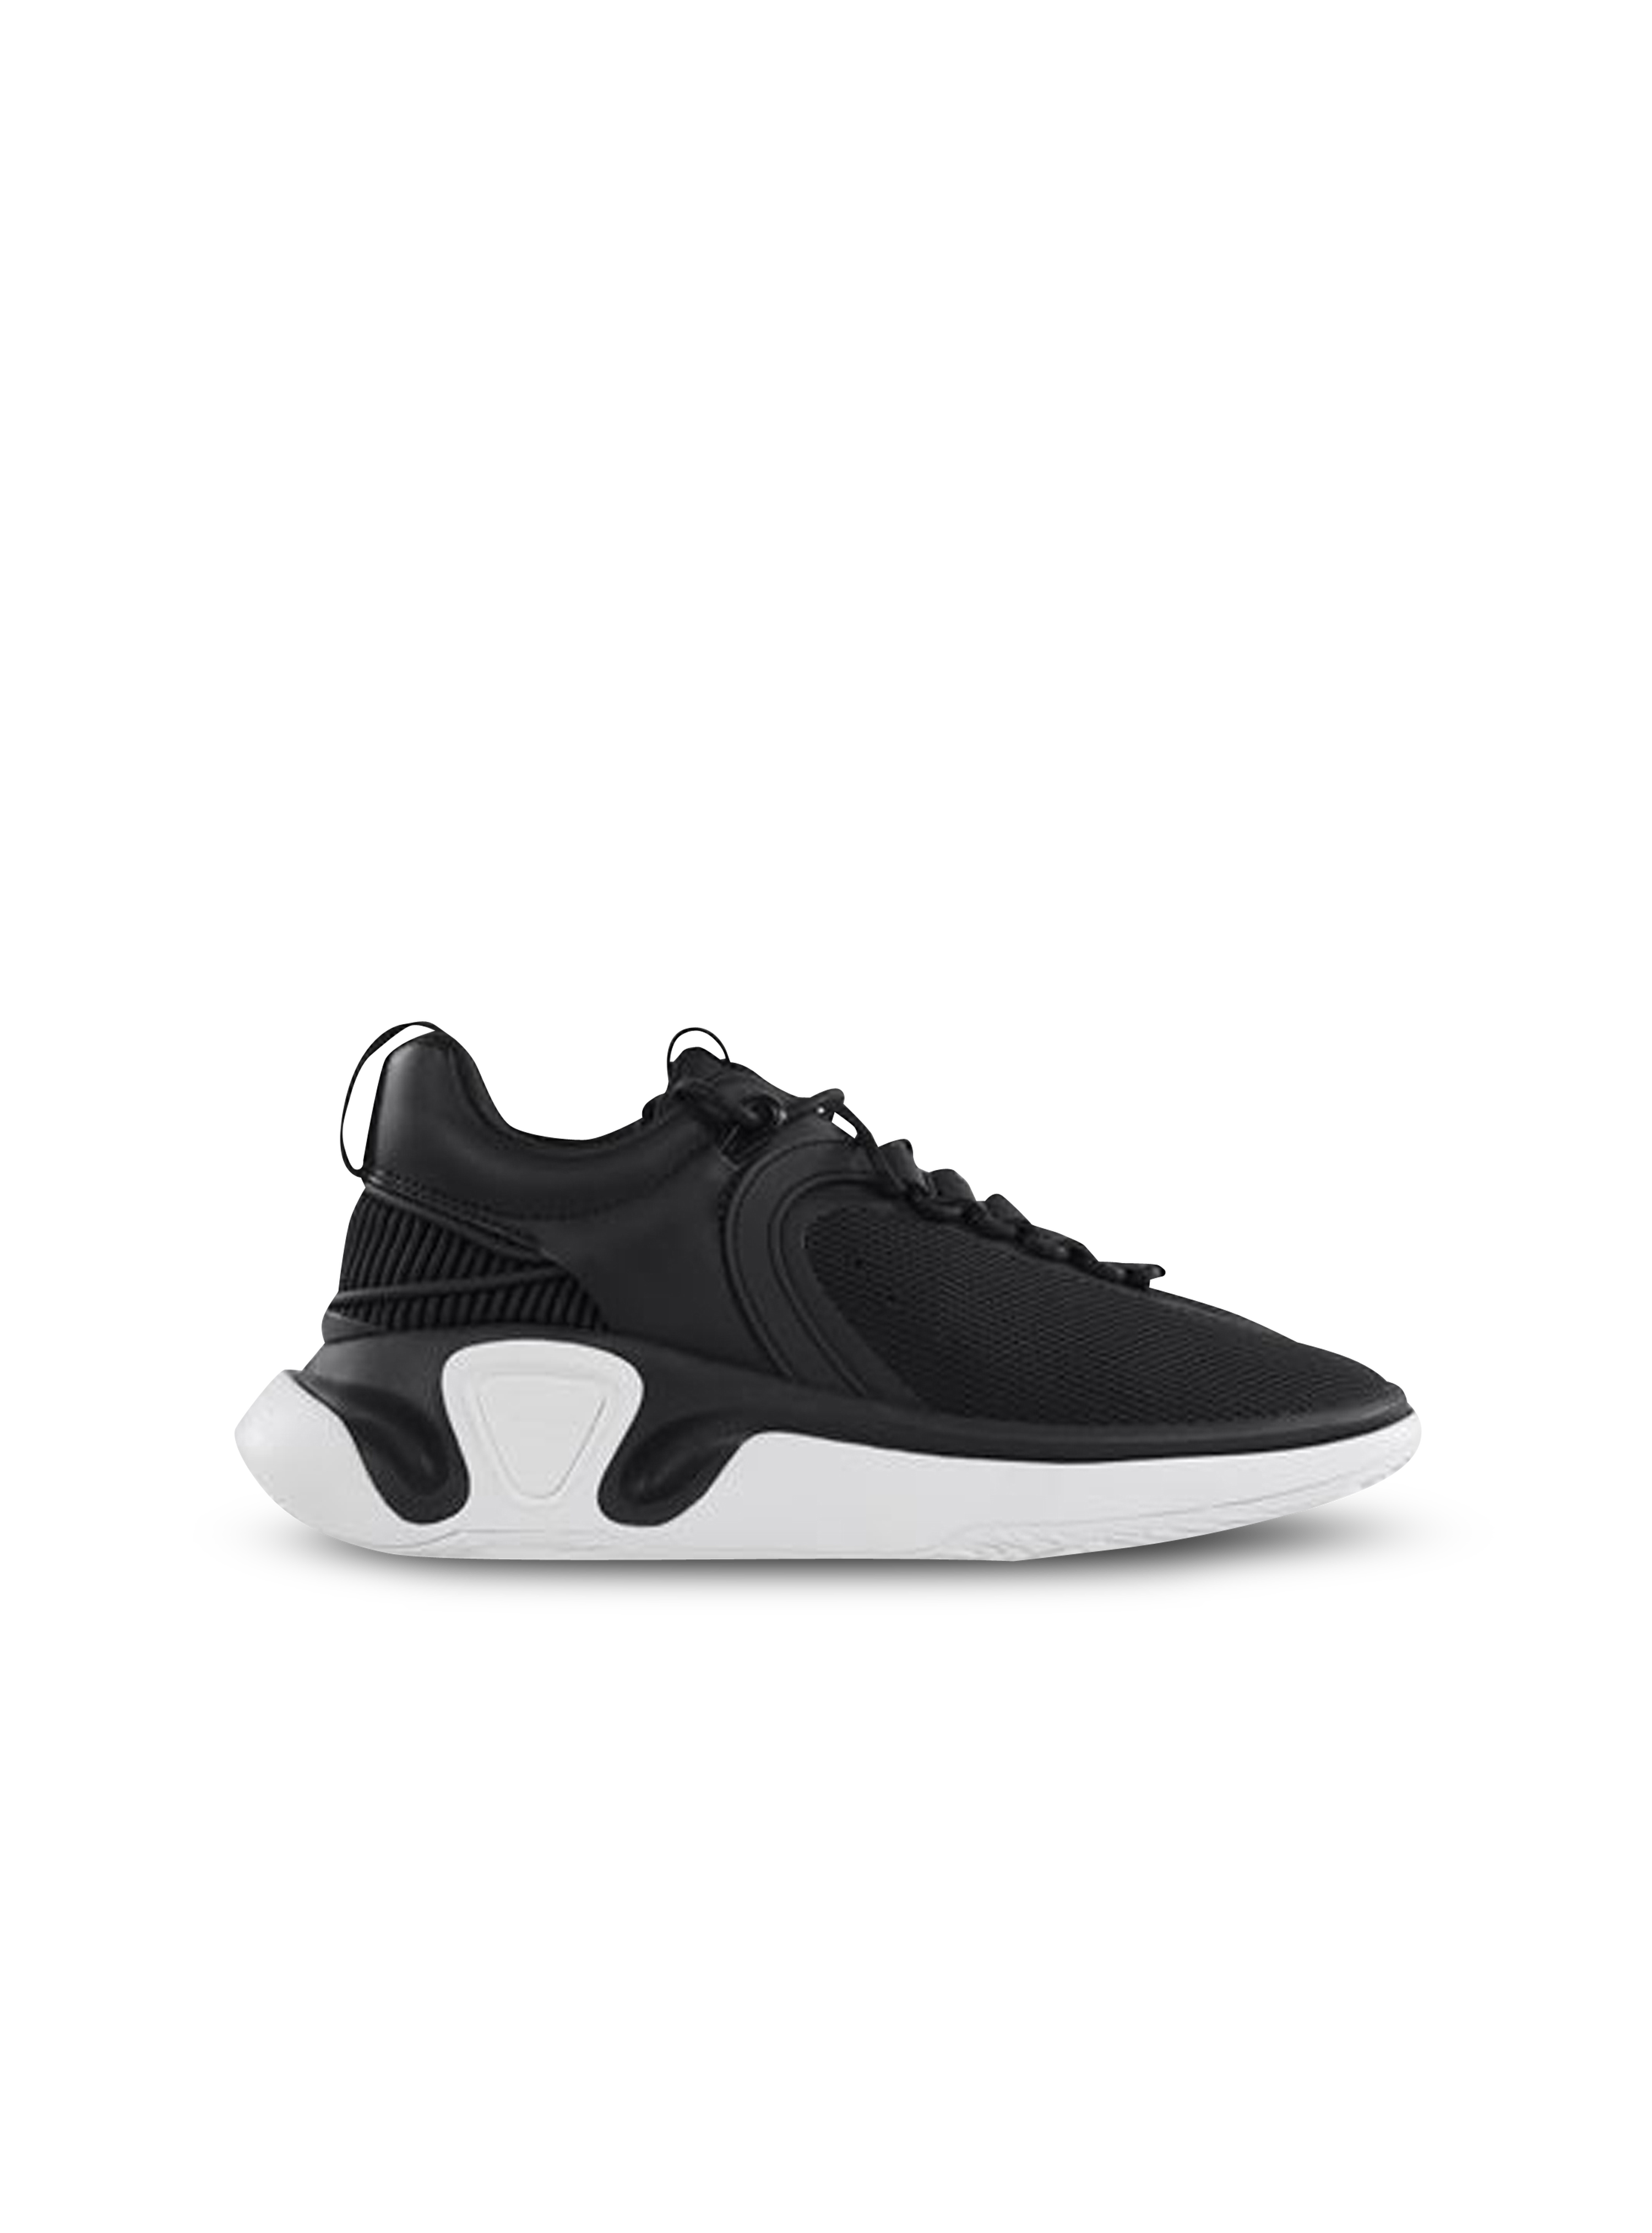 EXCLUSIVE - Gummy leather and mesh B-Runner sneakers, black